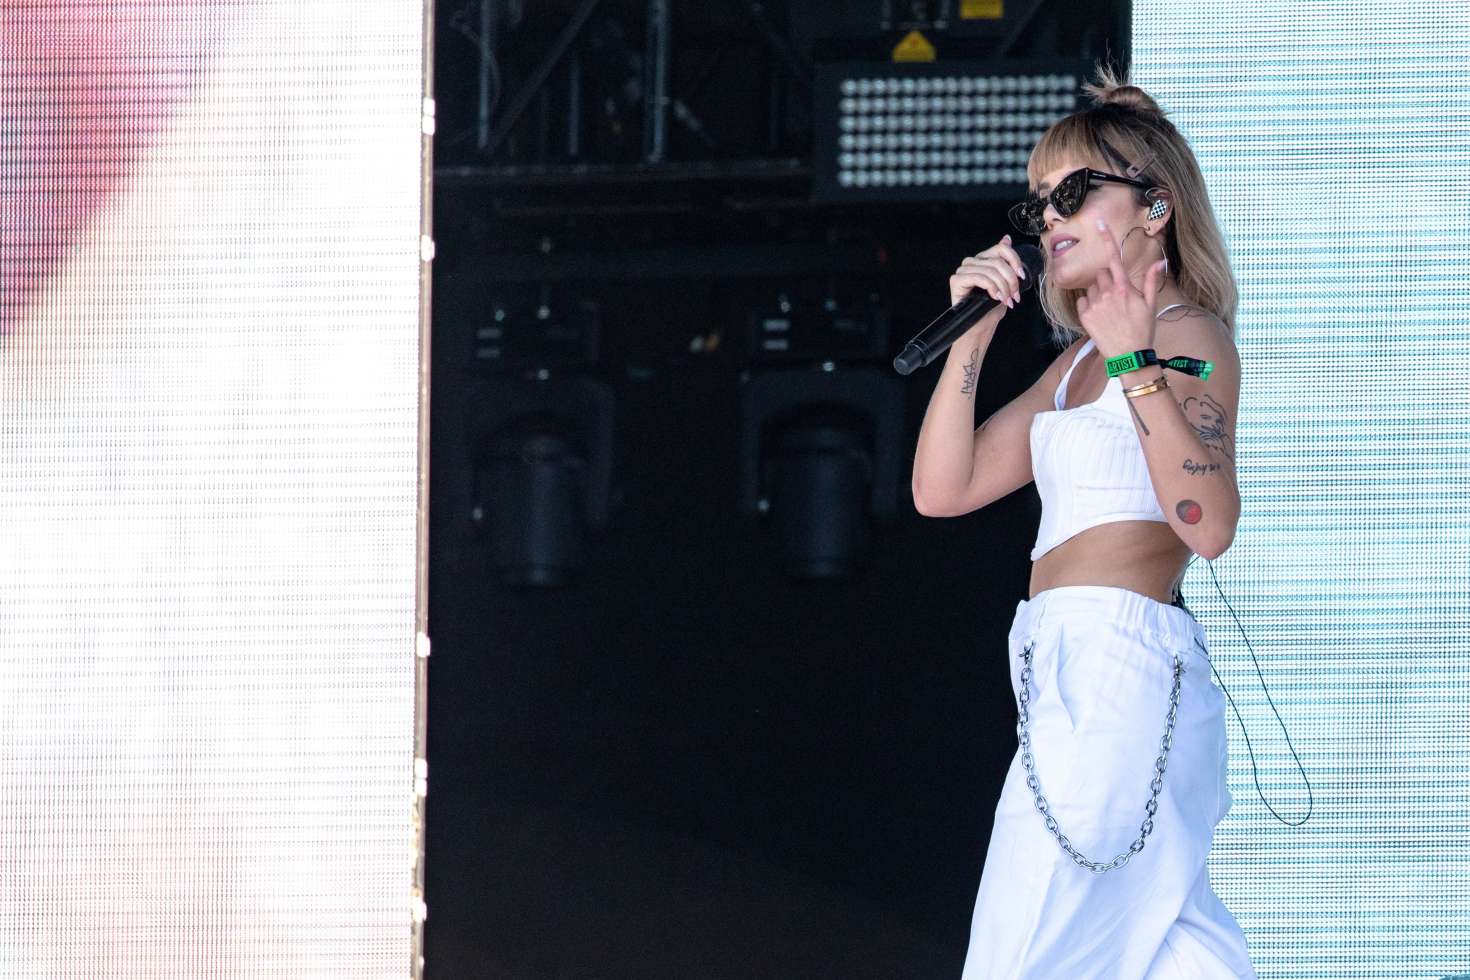 Halsey â€“ During BottleRock Music Festival at Napa Valley Expo